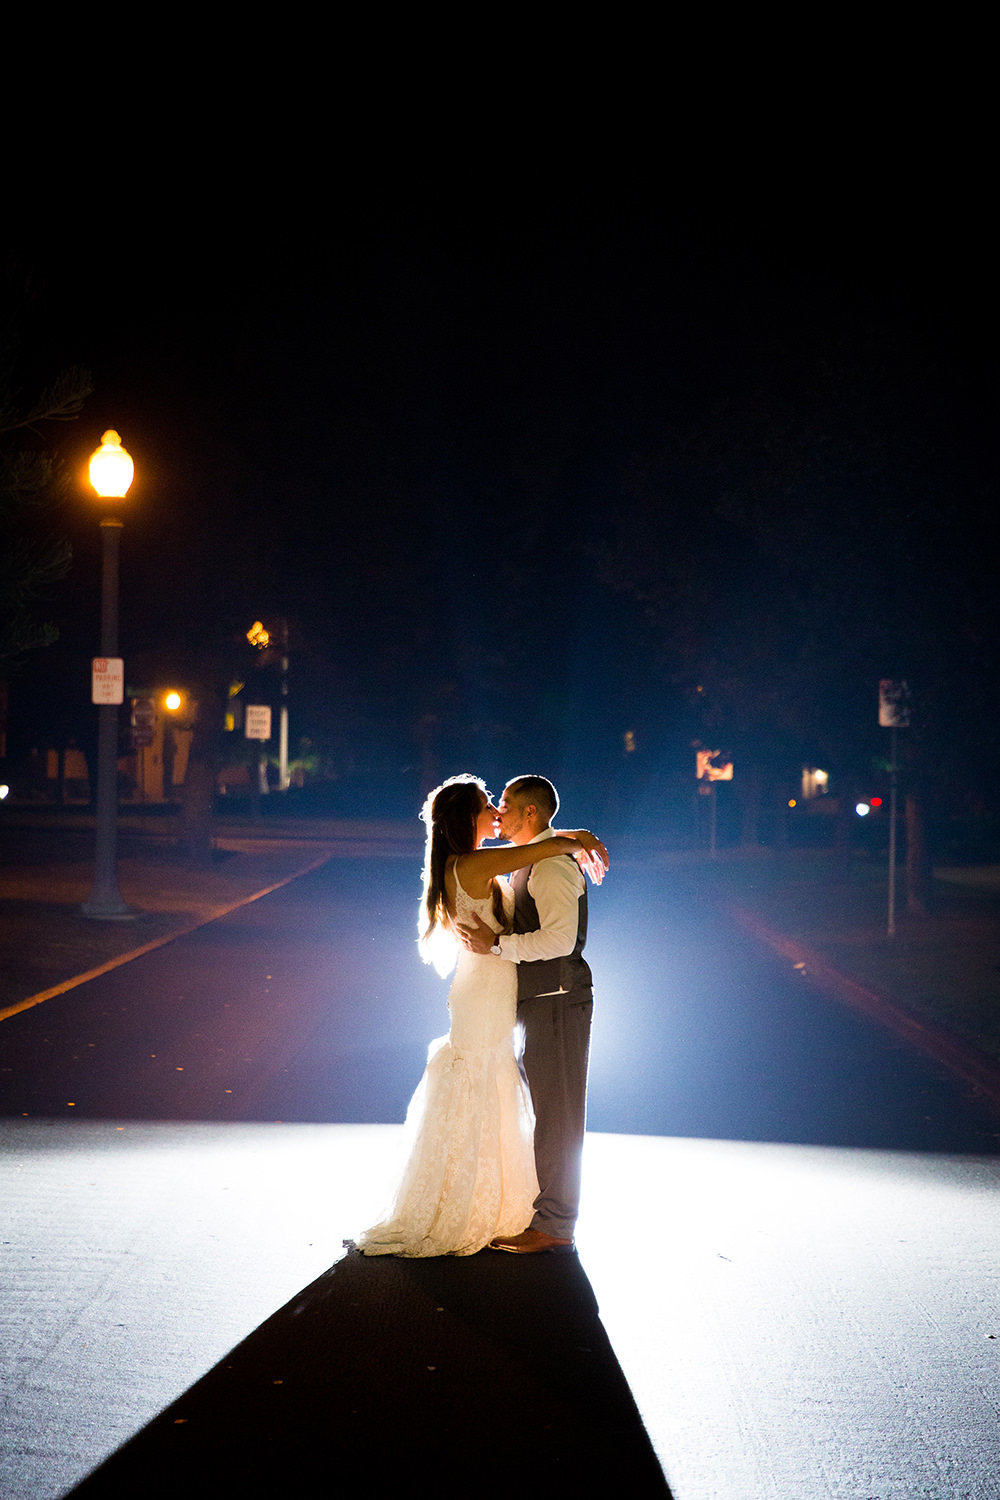 stunning night image with bride and groom at brick